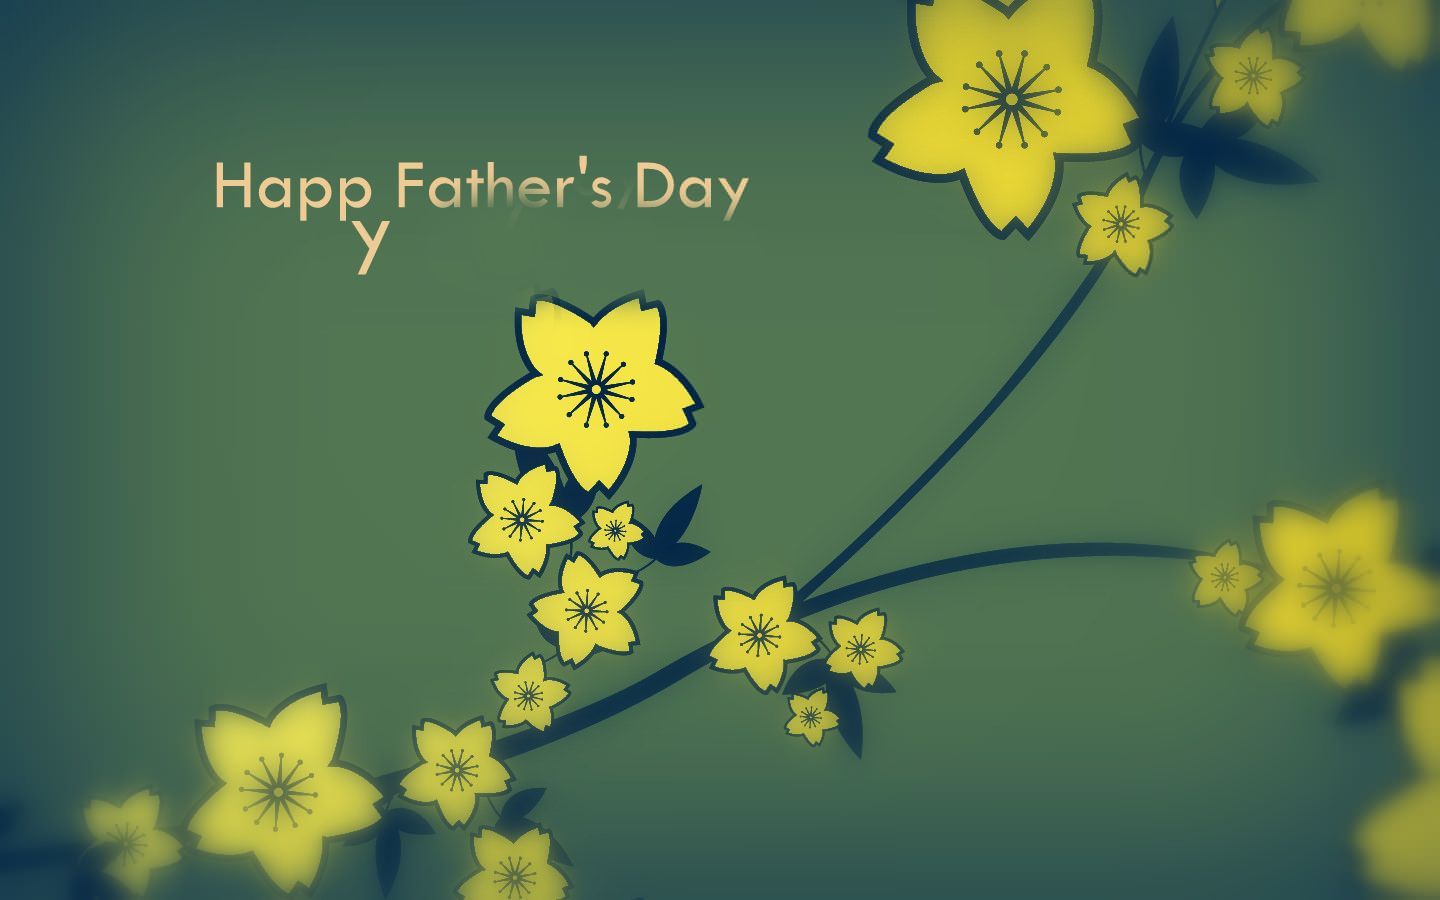 Happy Fathers Day Image: Fathers Day 2018 Picture Photo Cards